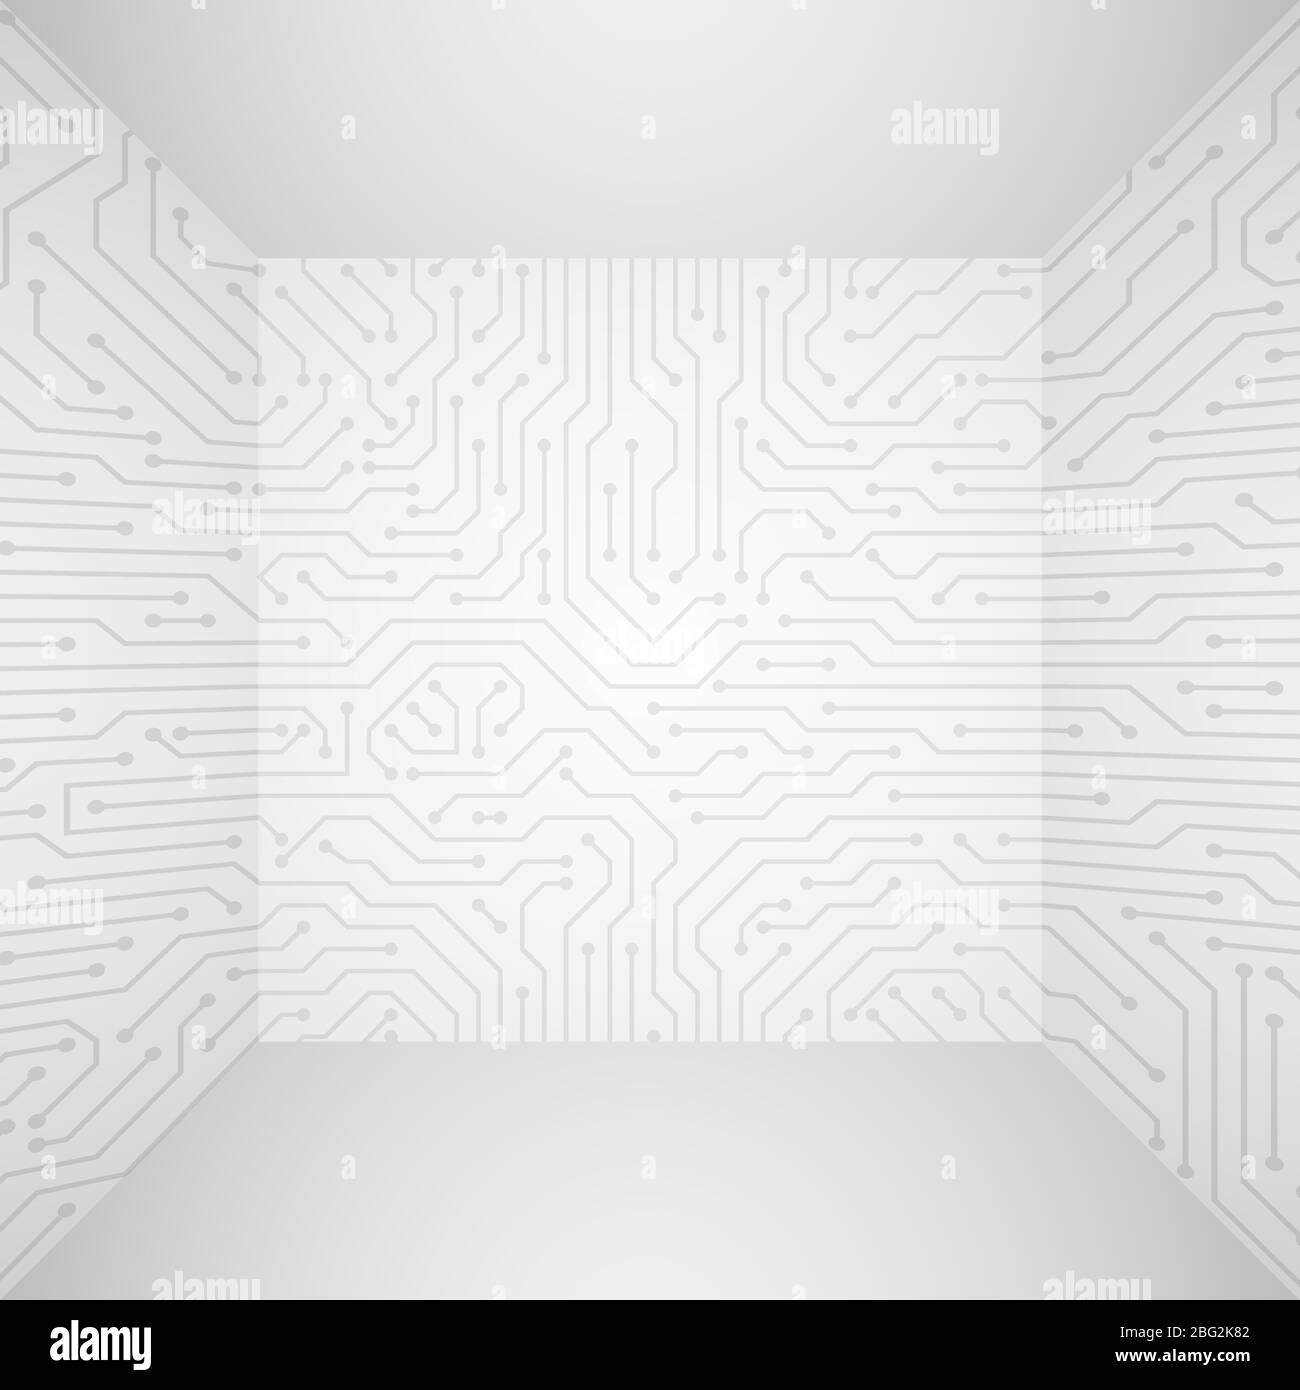 Abstract modern white technology 3d vector background with circuit board pattern. Information tech company concept. Technology circuit background, con Stock Vector